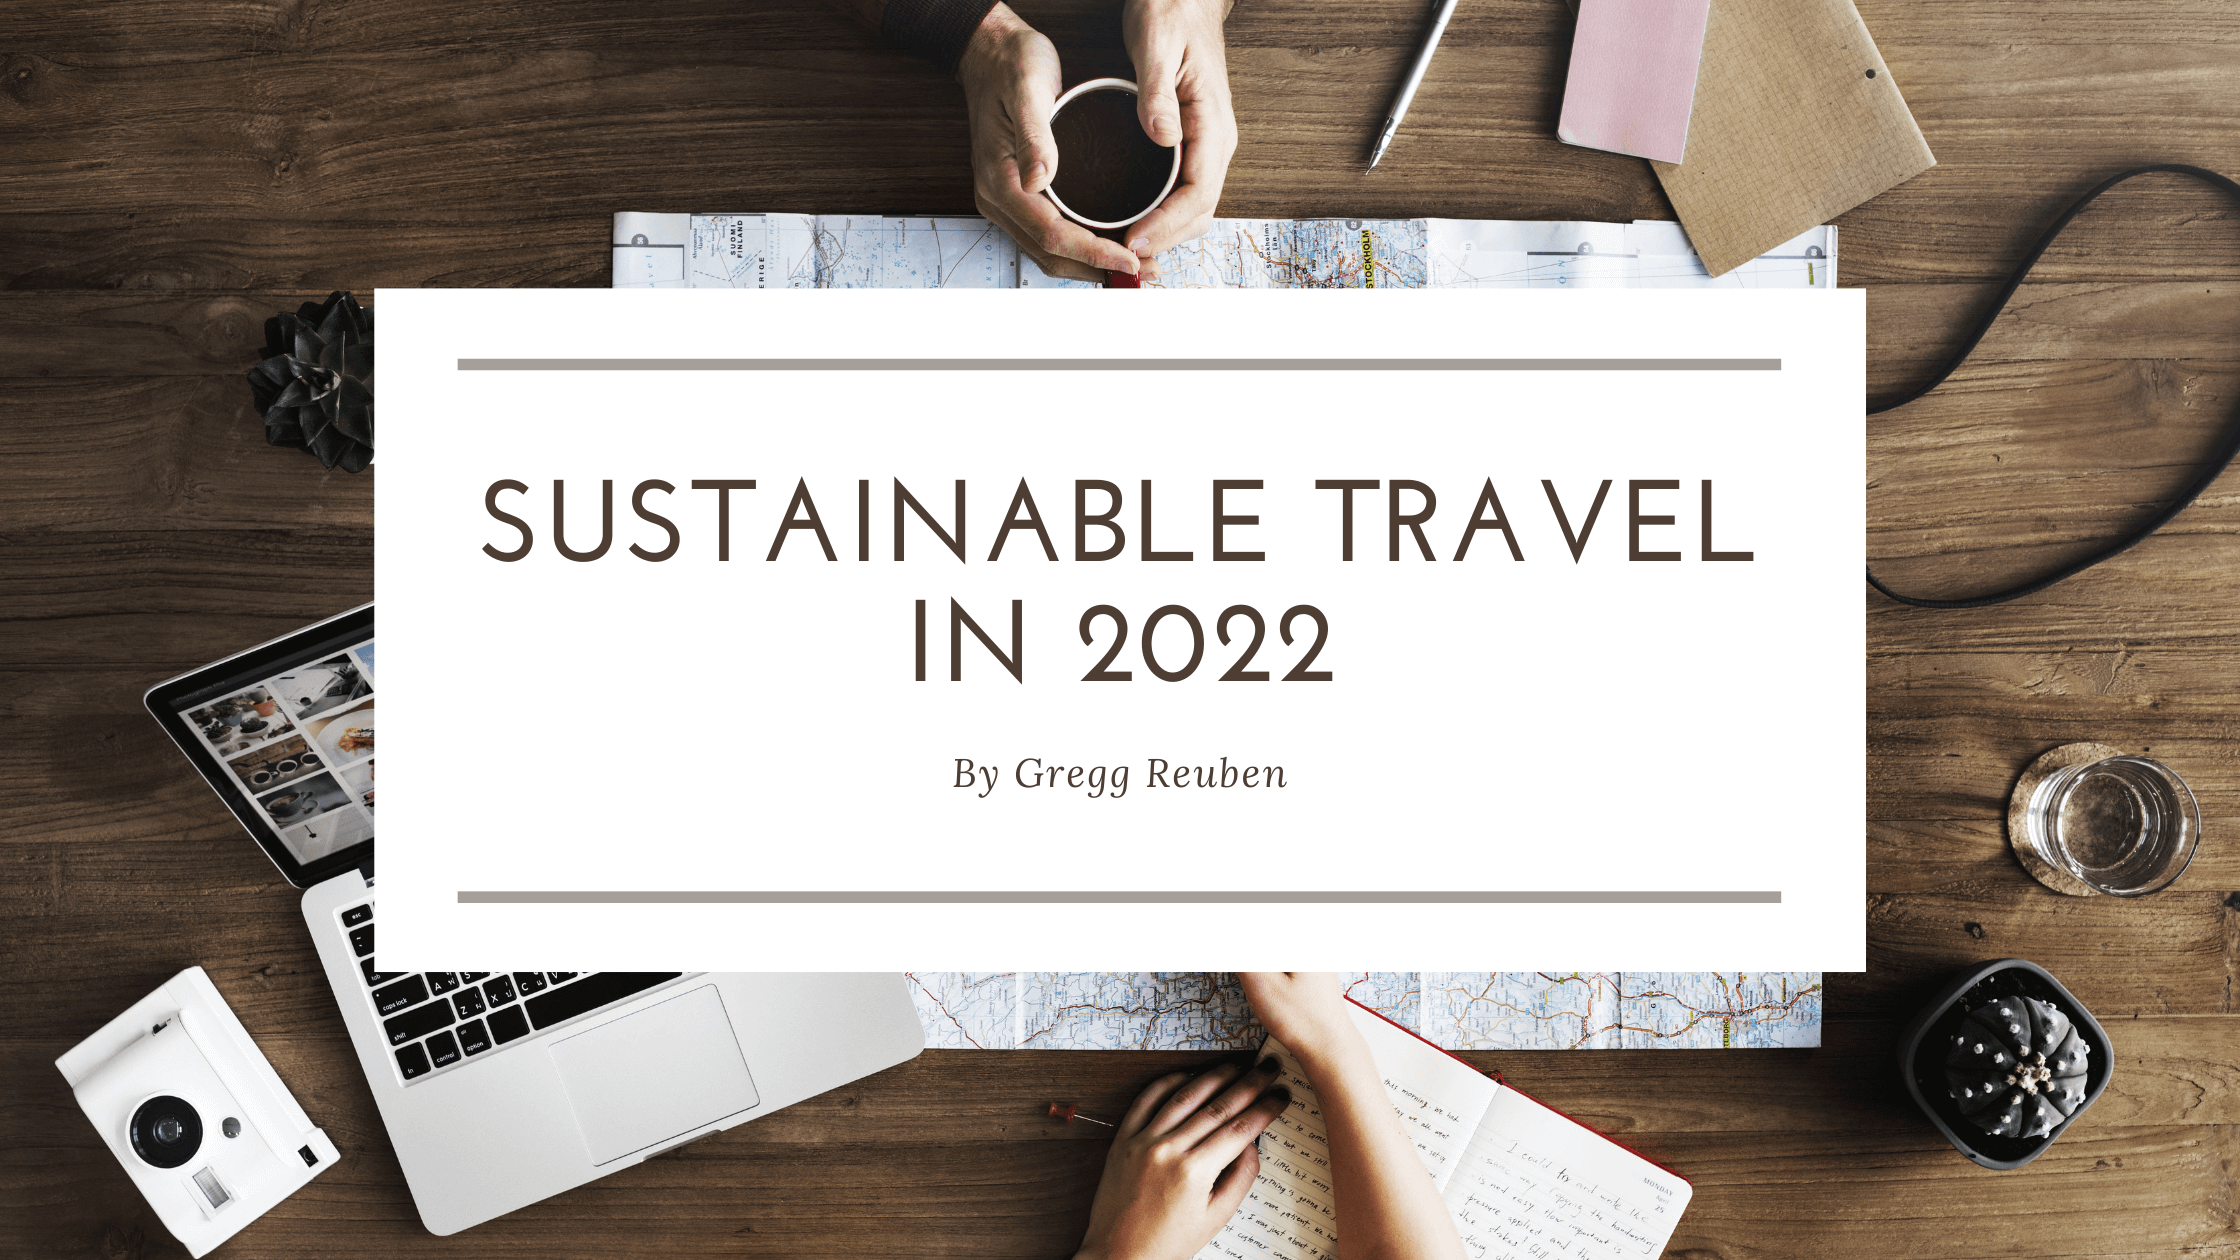 sustainable travel report 2022